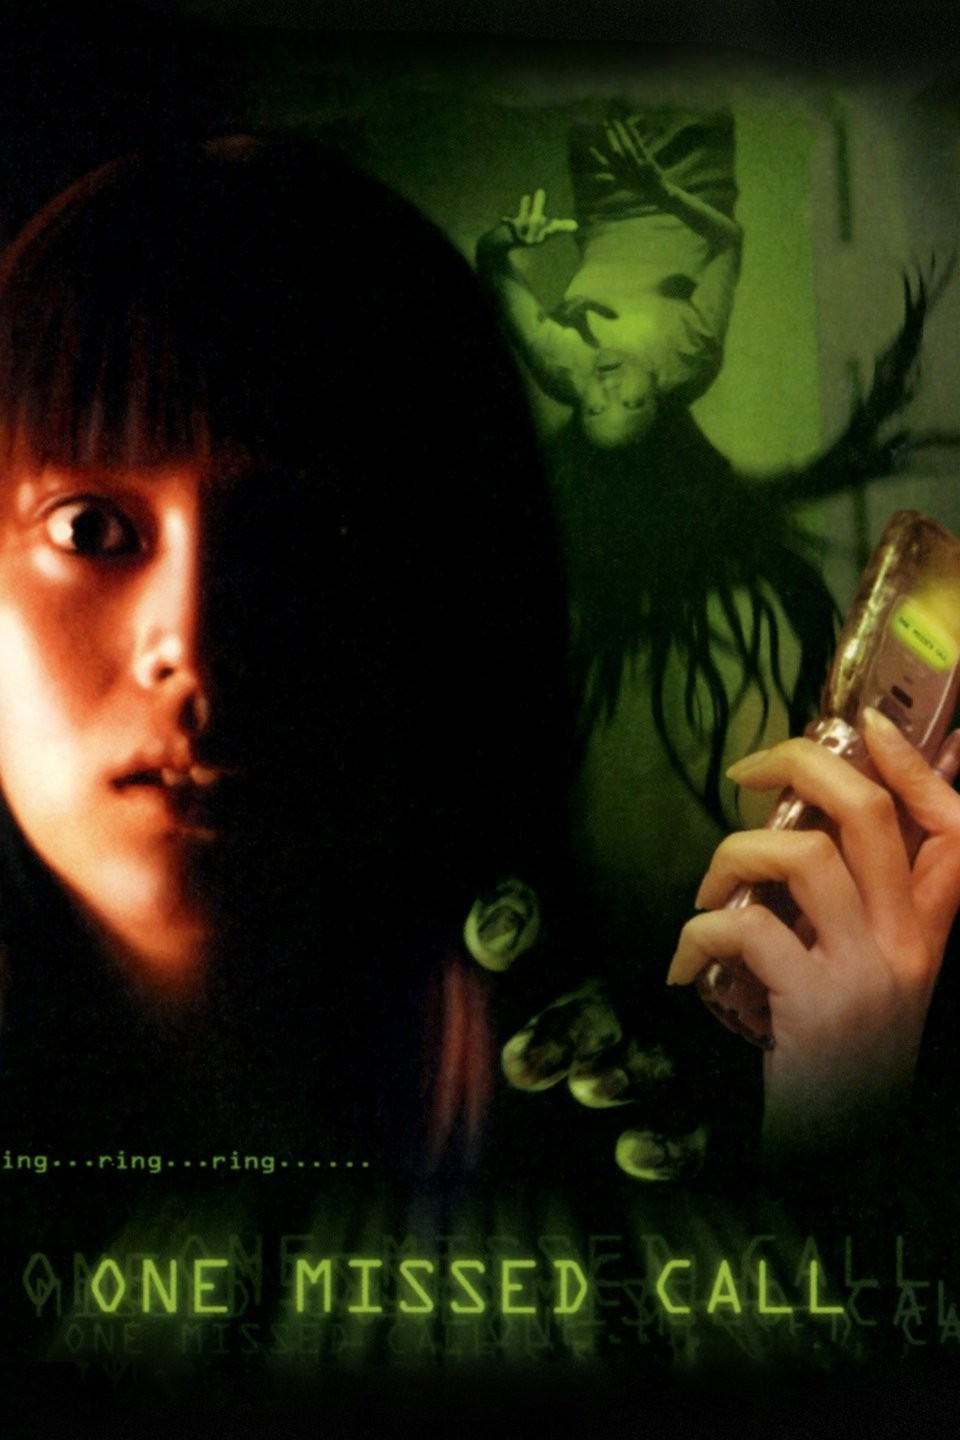 One Missed Call (2003) Hindi Dubbed (org) & Japanese [Dual Audio] BluRay 1080p 720p 480p HD [Full Movie]